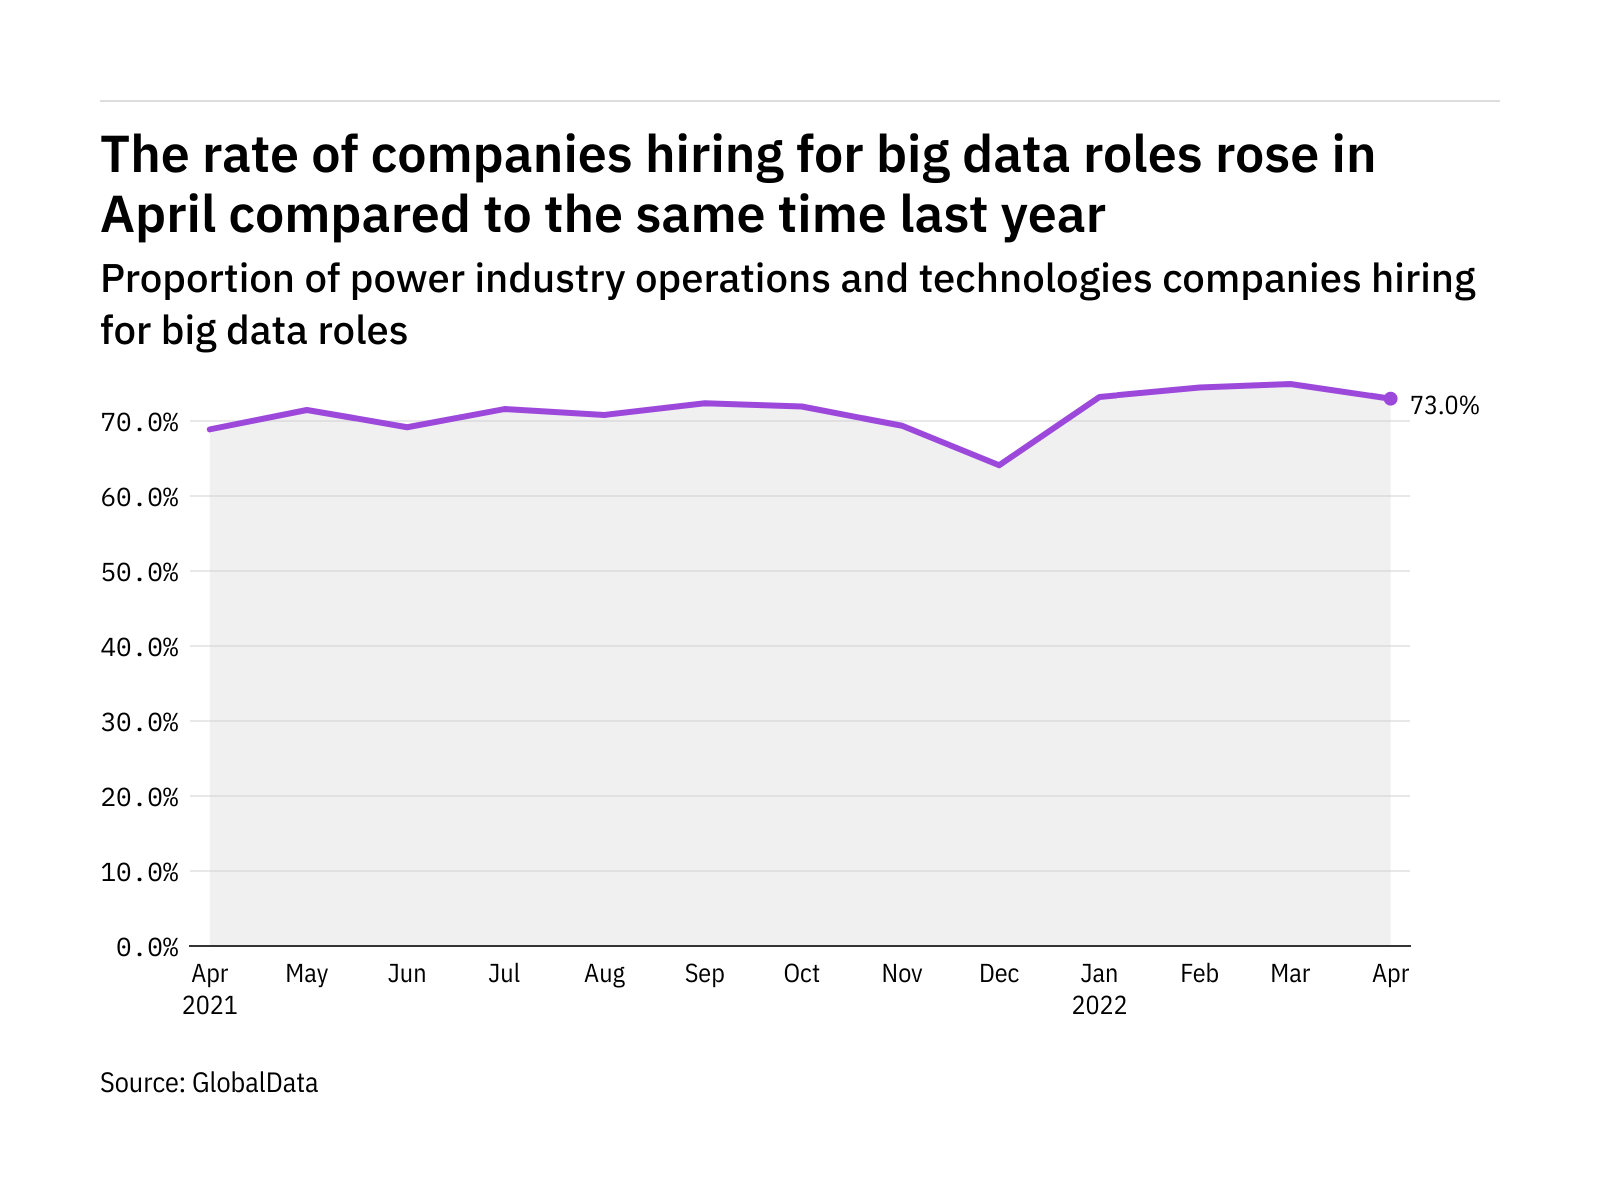 Big data hiring levels in the power industry rose in April 2022